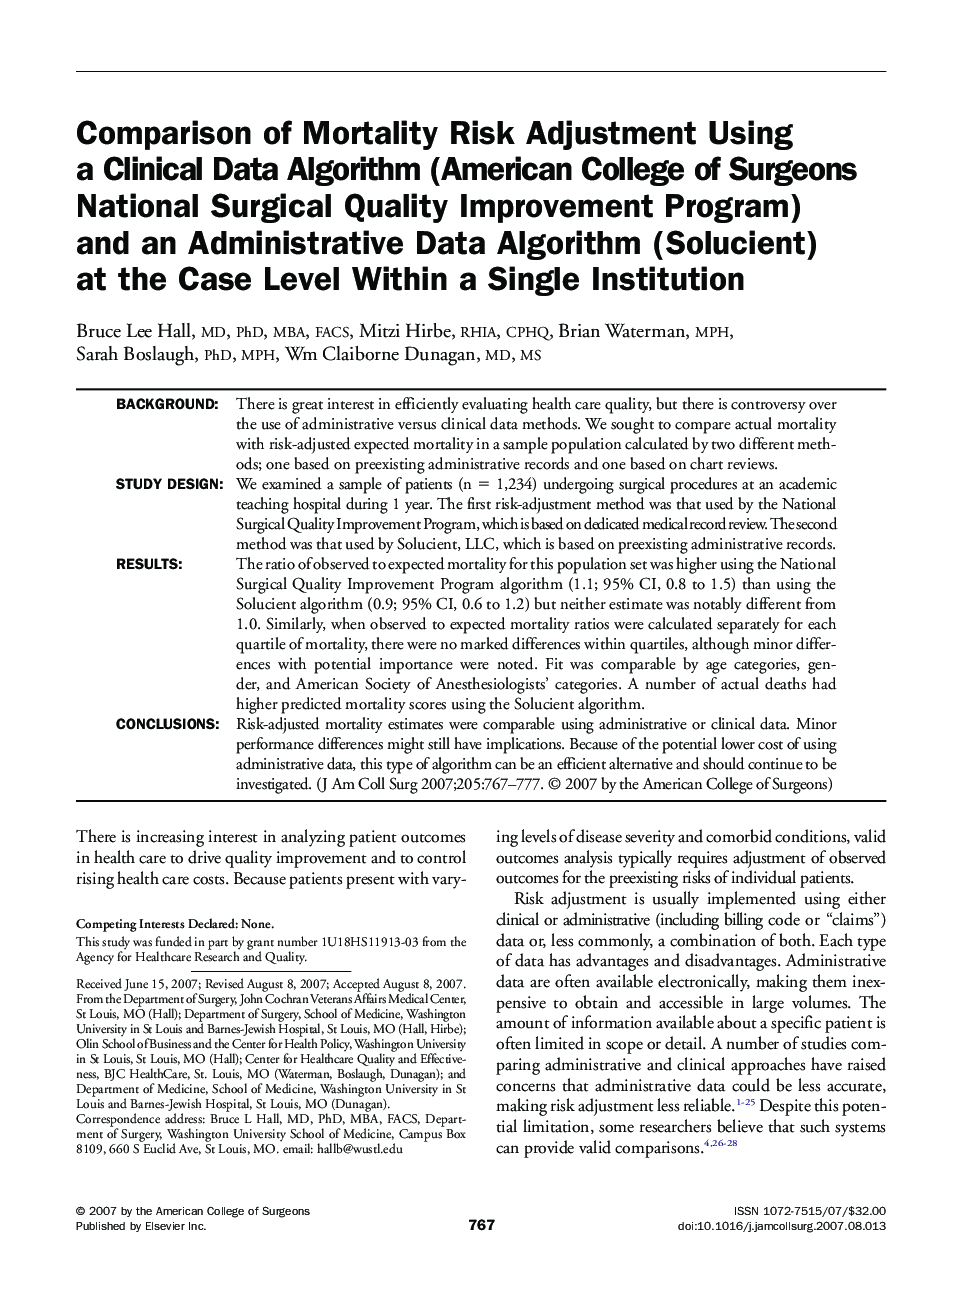 Comparison of Mortality Risk Adjustment Using a Clinical Data Algorithm (American College of Surgeons National Surgical Quality Improvement Program) and an Administrative Data Algorithm (Solucient) at the Case Level Within a Single Institution 